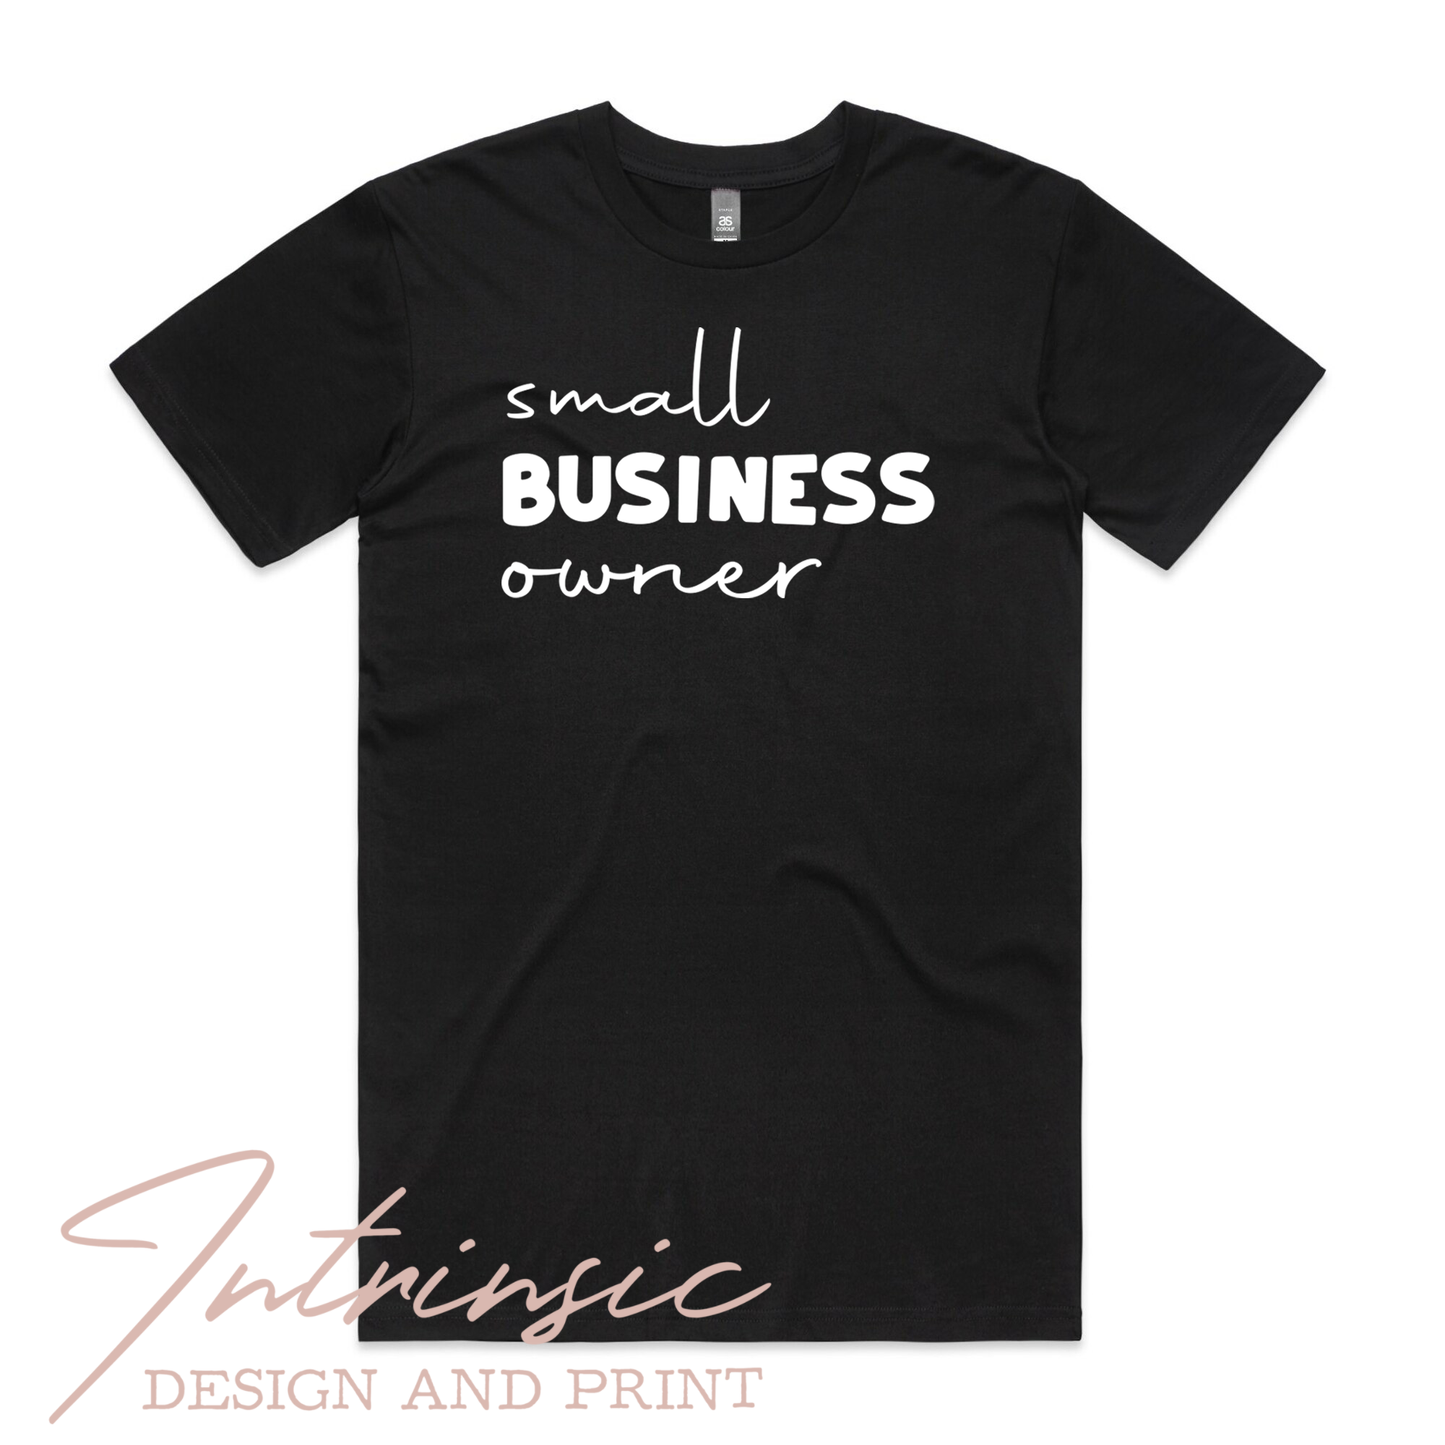 Small business owner - unisex